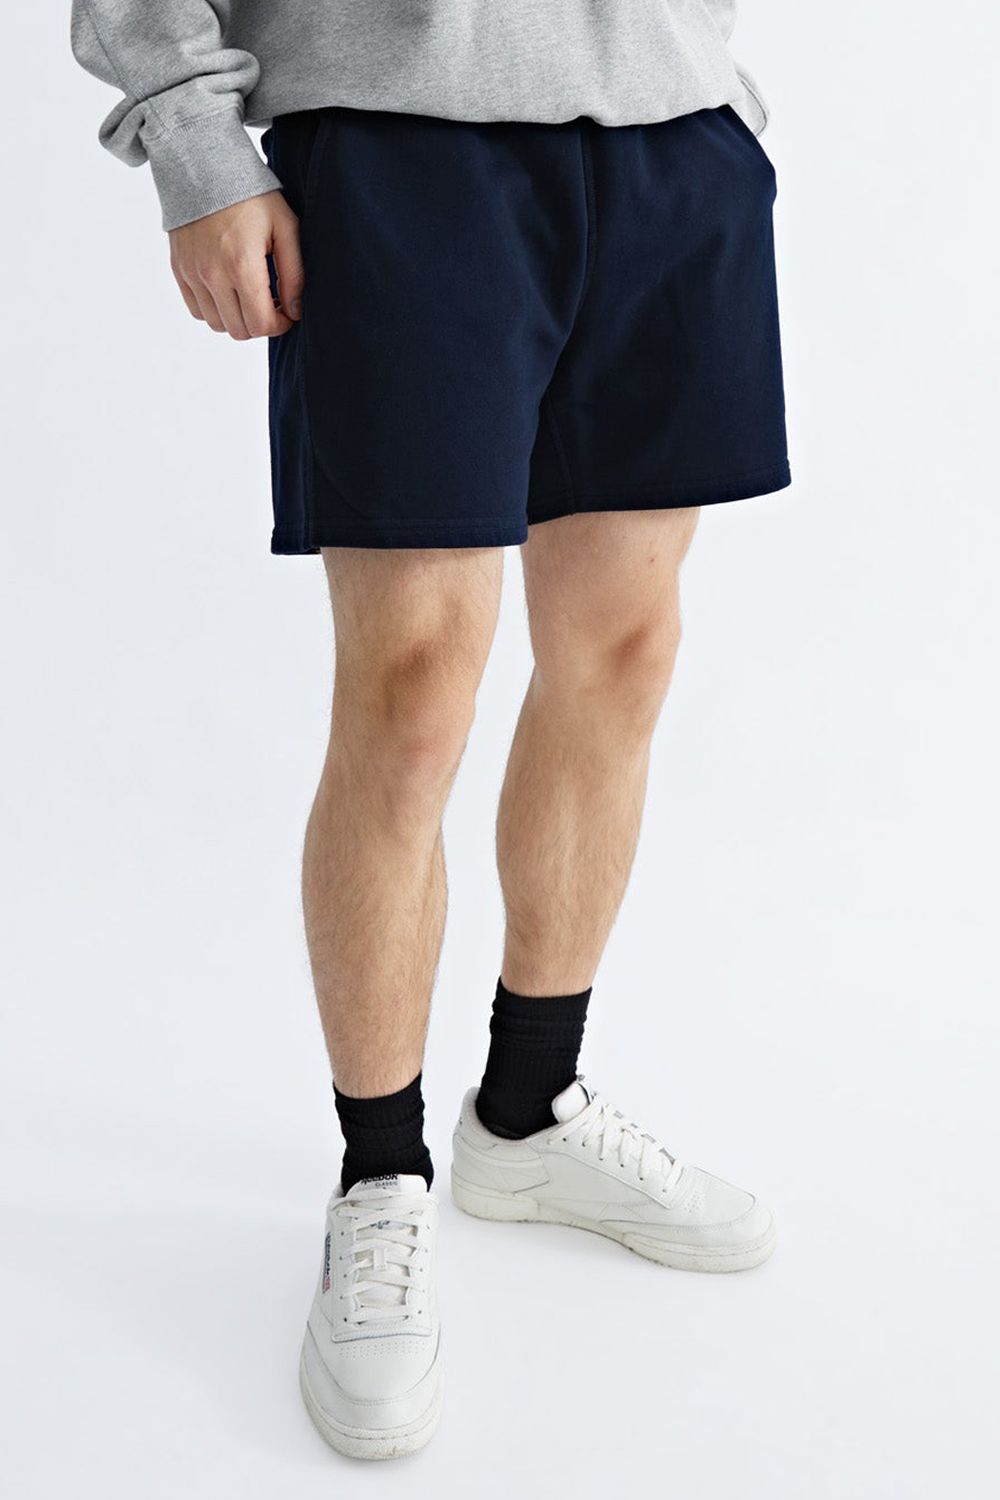 REIGNING CHAMP - 【国内正規品】 MIDWEIGHT TERRY SHORT 6 / ミッド ...